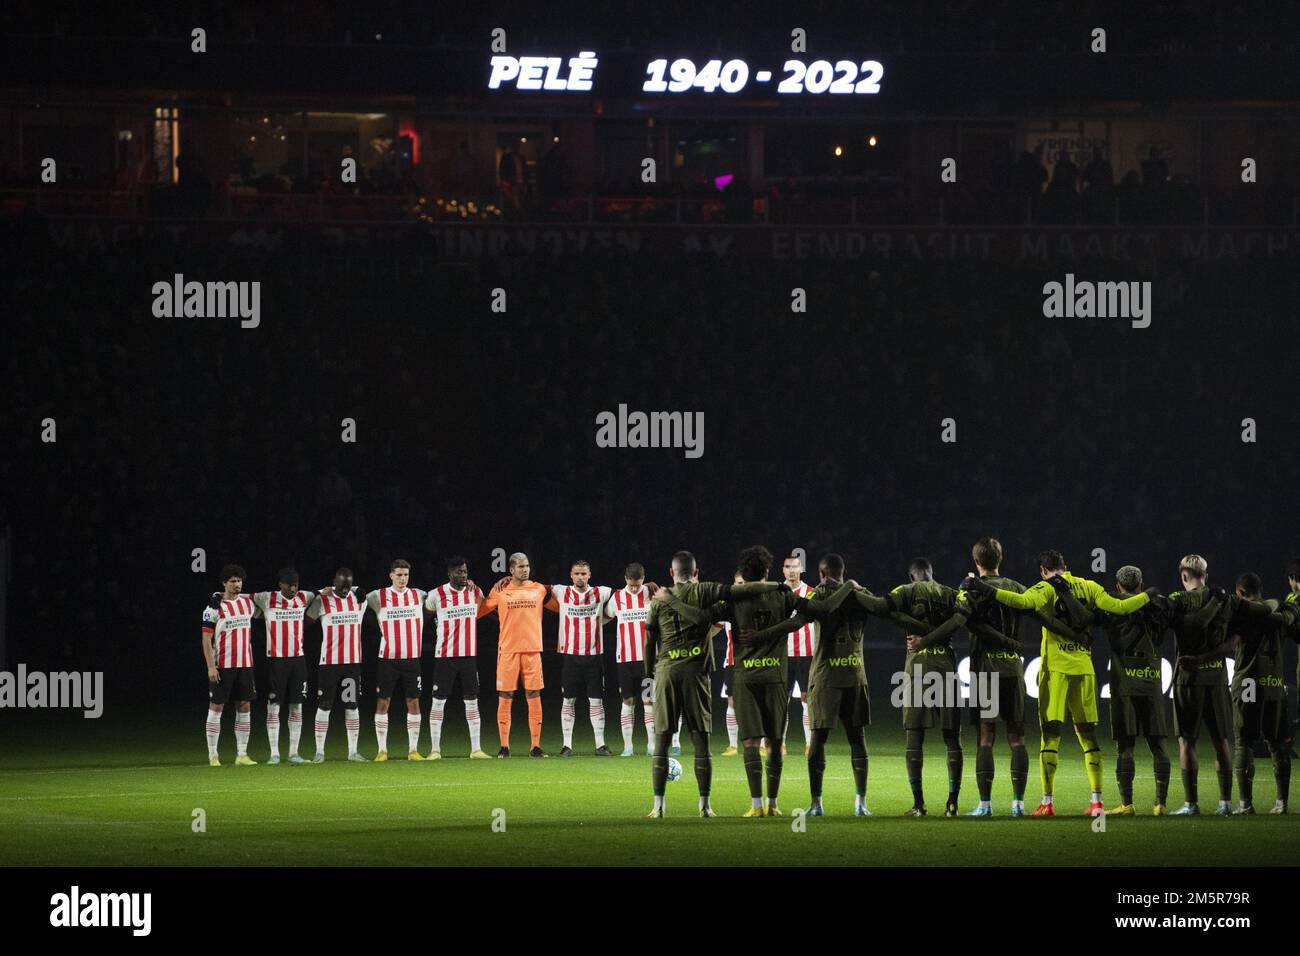 EINDHOVEN A minute's silence for Pele during the friendly game PSV against AC Milan in the Philips stadium. ANP OLAF KRAAK Stock Photo